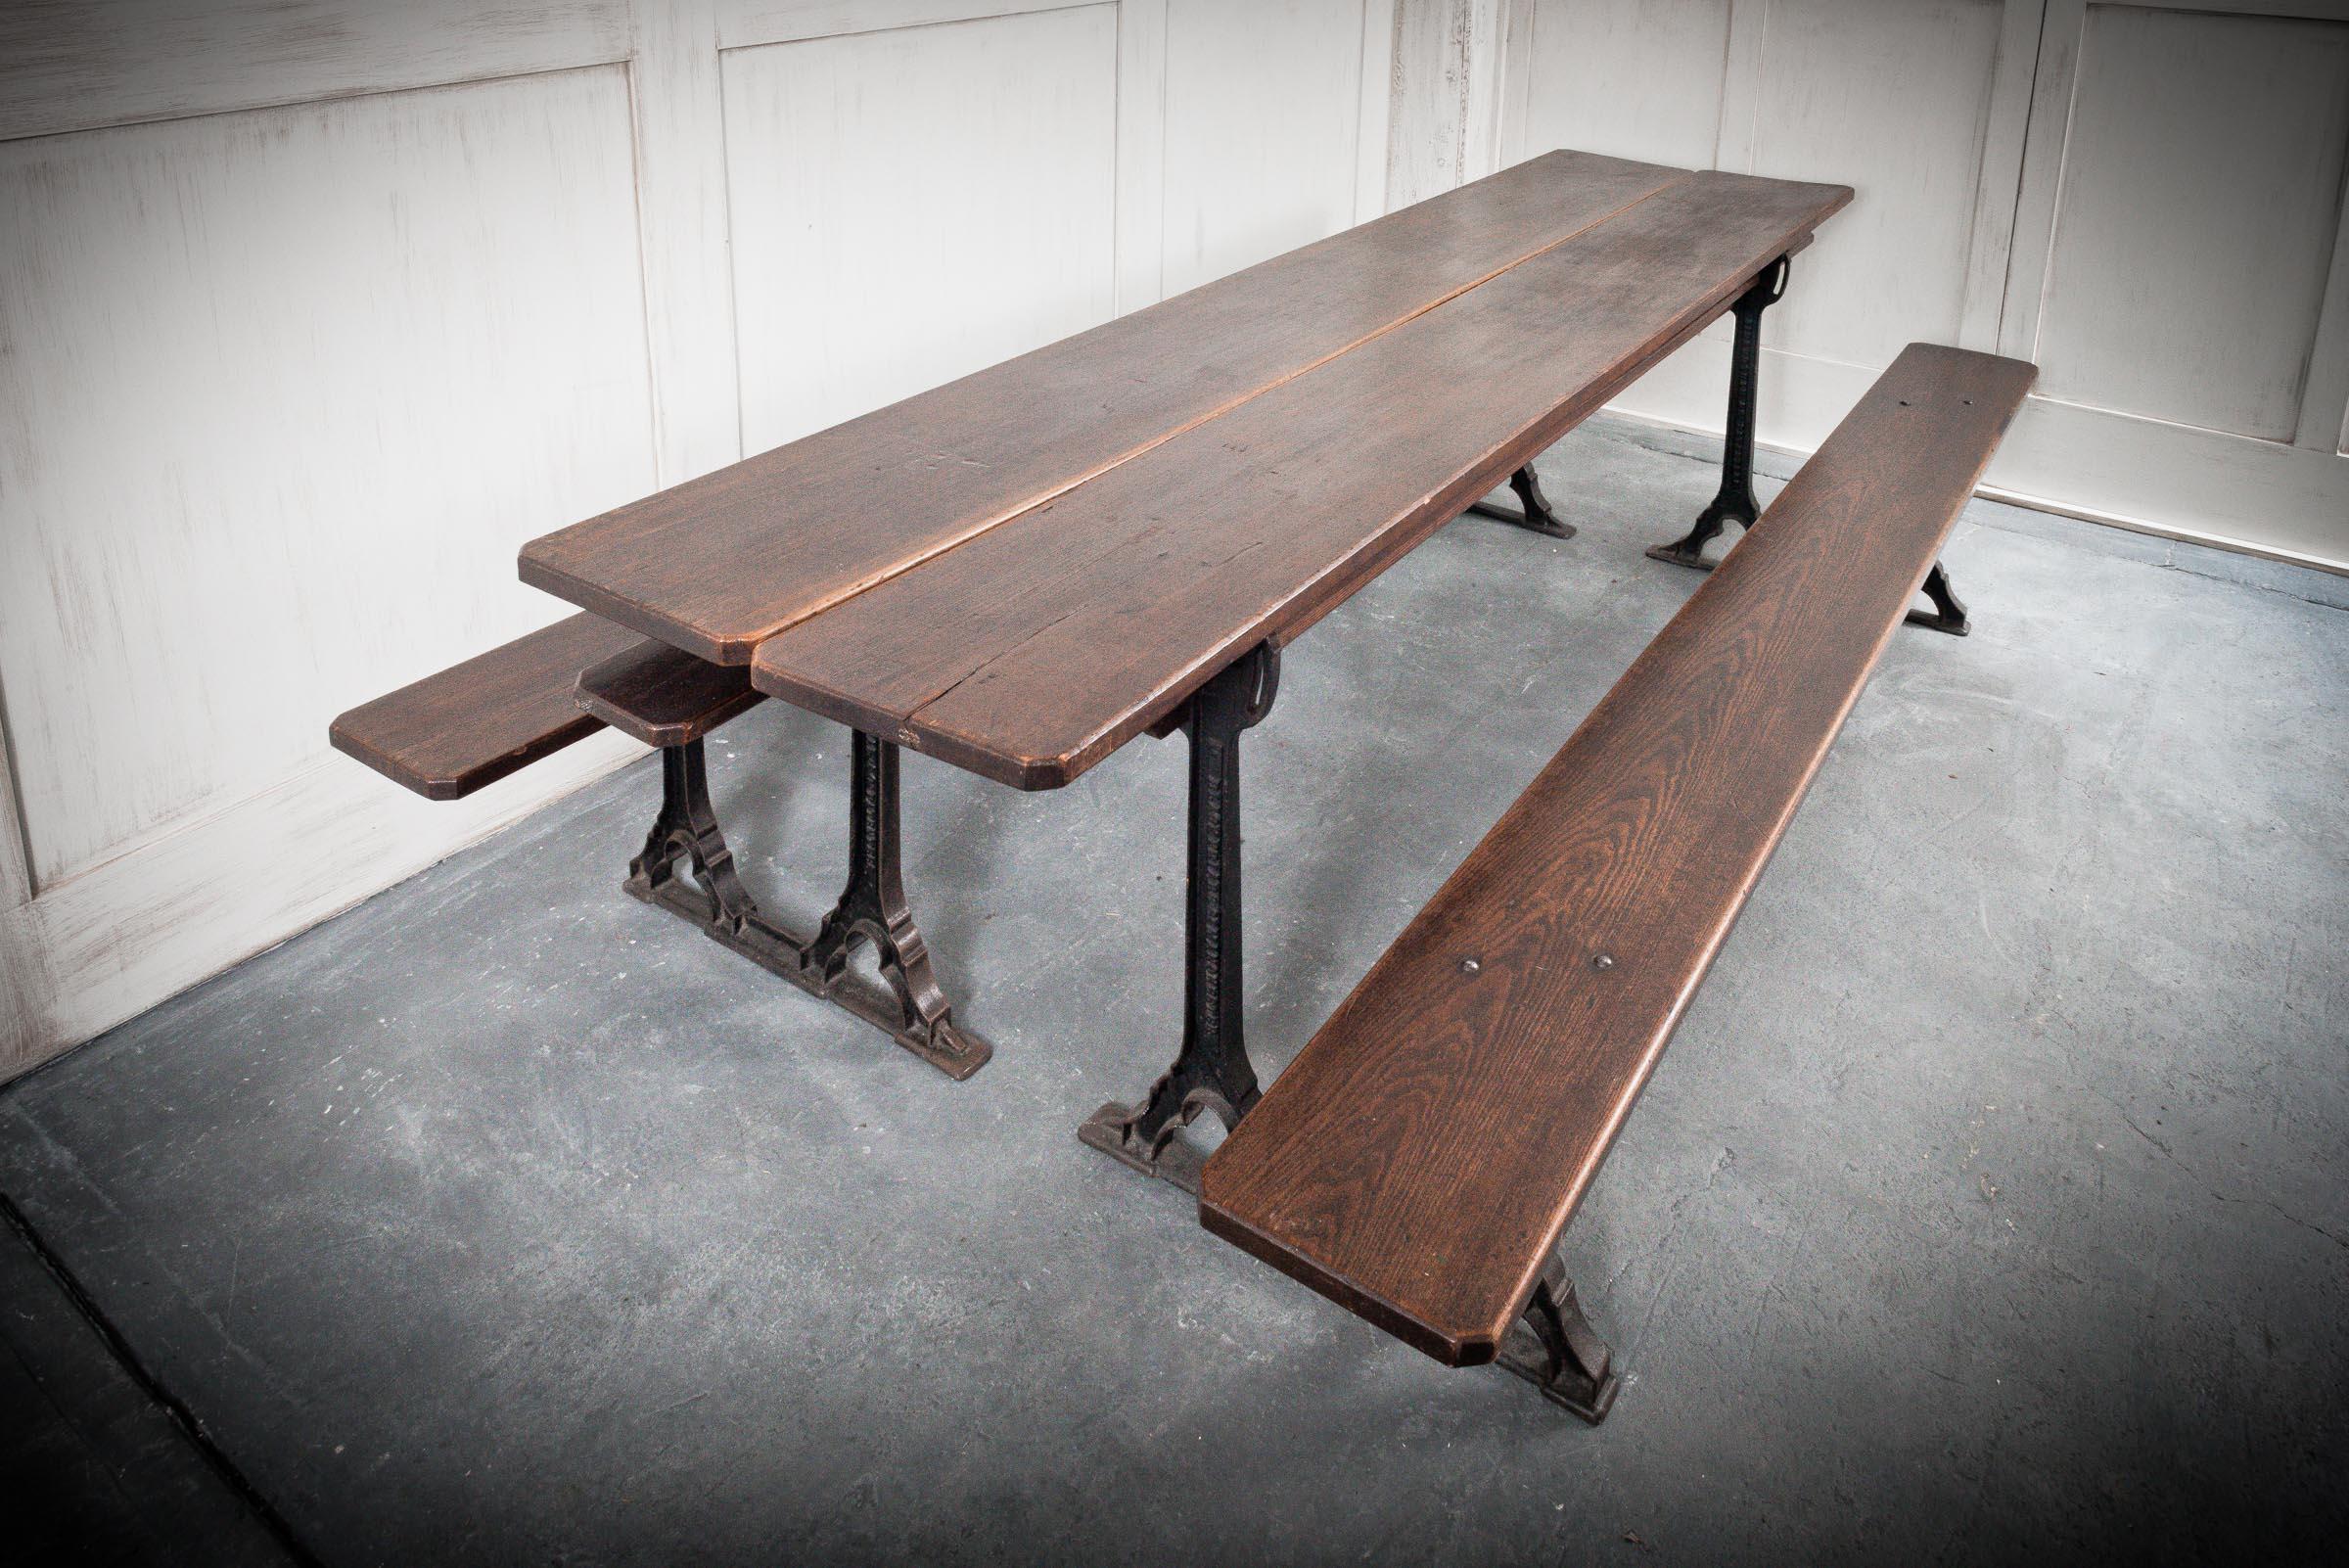 A charming metamorphic pair of benches that go together to form a single table typical of the Victorian era. English, Circa 1860, these benches were originally used at pews or school tables within churches. The dark pitch pine bench sits on a sturdy